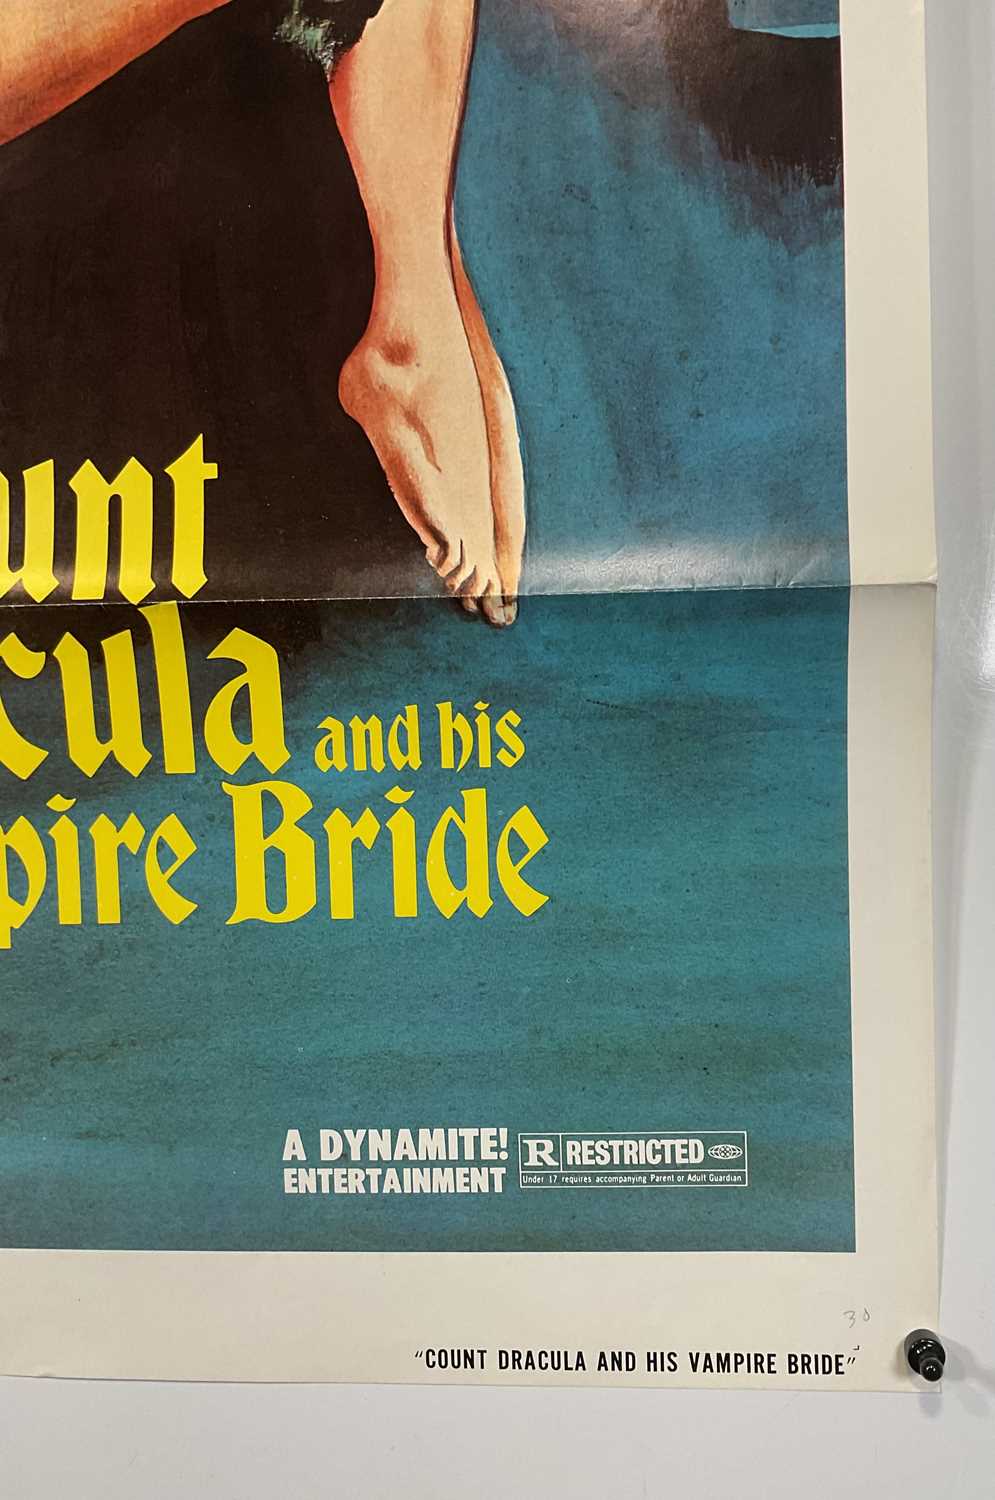 COUNT DRACULA AND HIS VAMPIRE BRIDE (1978) US one sheet movie poster, released in the UK - Image 3 of 6